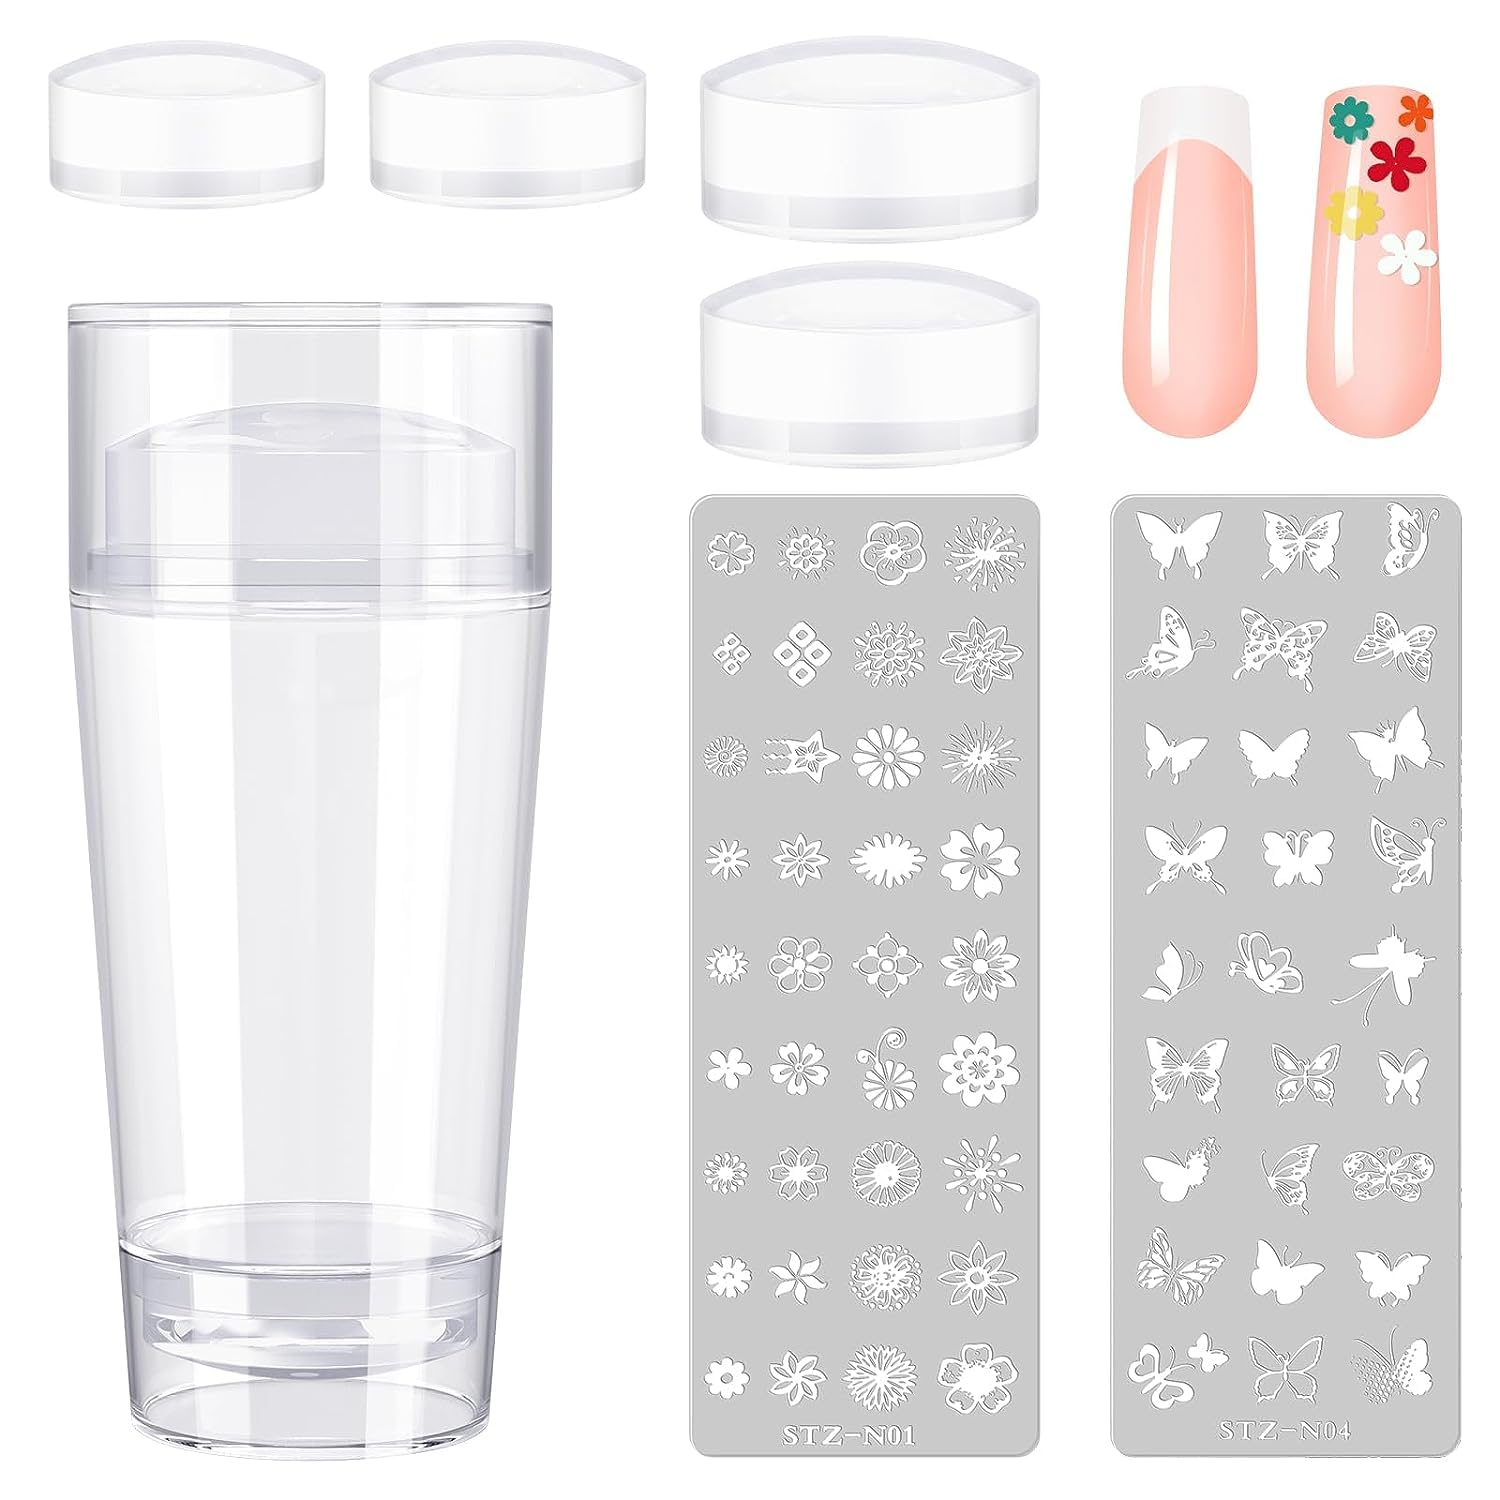 French Nails Stamp Set, 2 Pieces Nail Stamps for Nail Designs with 1 Scraper, 2 Nail Stamping Plates and 4 Silicone Gel Nail Stamp Heads